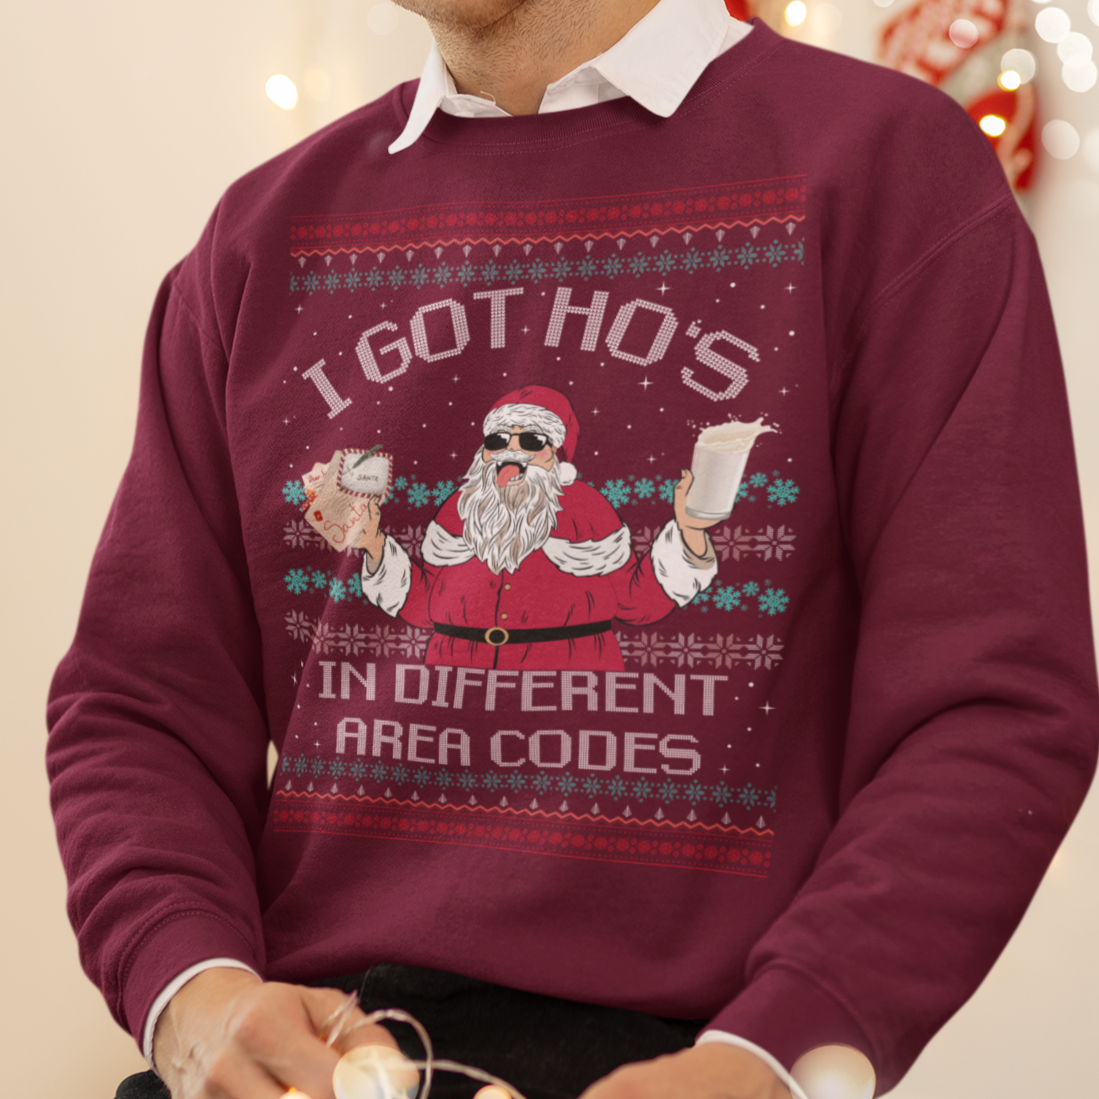 I Got Ho's In Different Area Codes - Unisex Ugly Sweater, Christmas, Winter, Fall